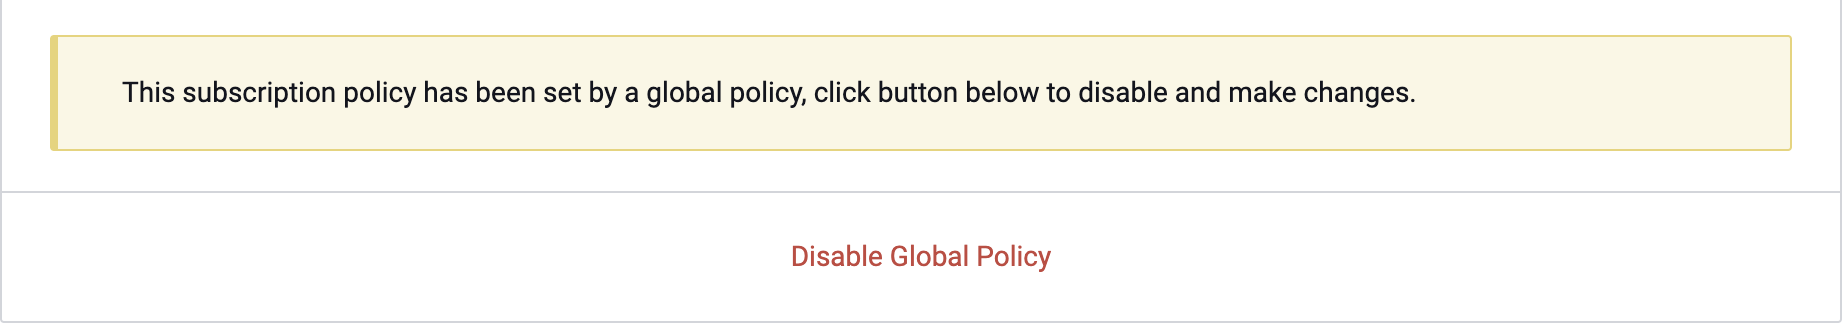 Disable Global Subscription Policy